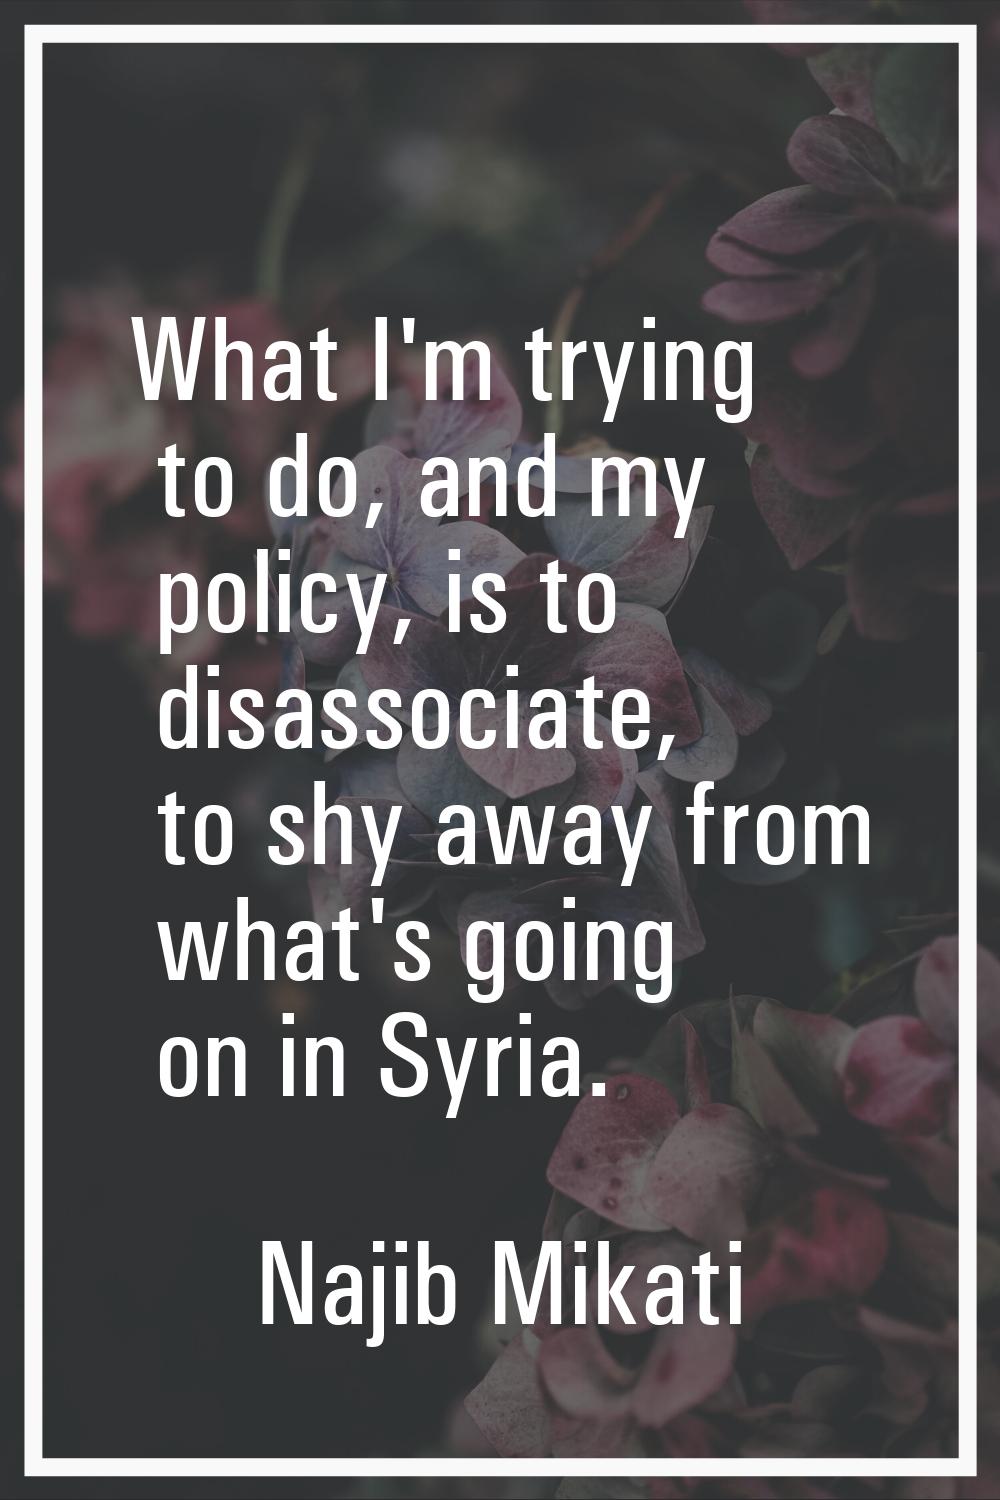 What I'm trying to do, and my policy, is to disassociate, to shy away from what's going on in Syria